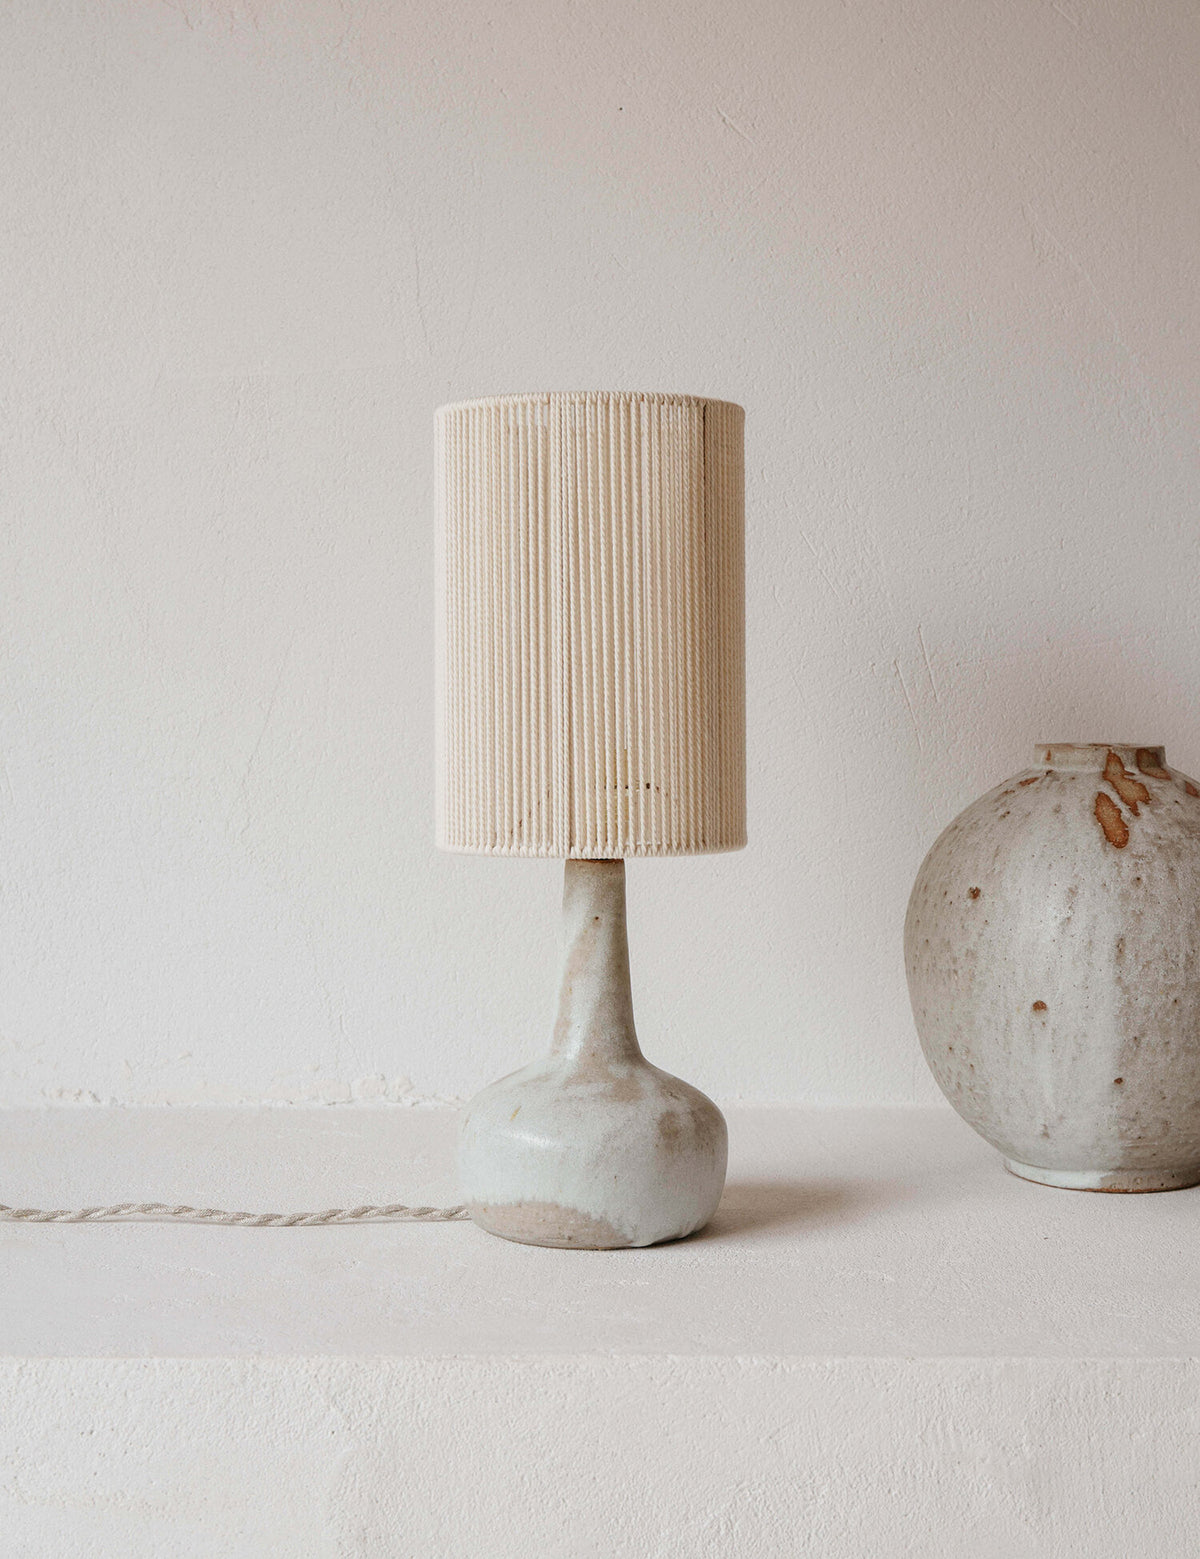 Grès: hand crafted table lamps